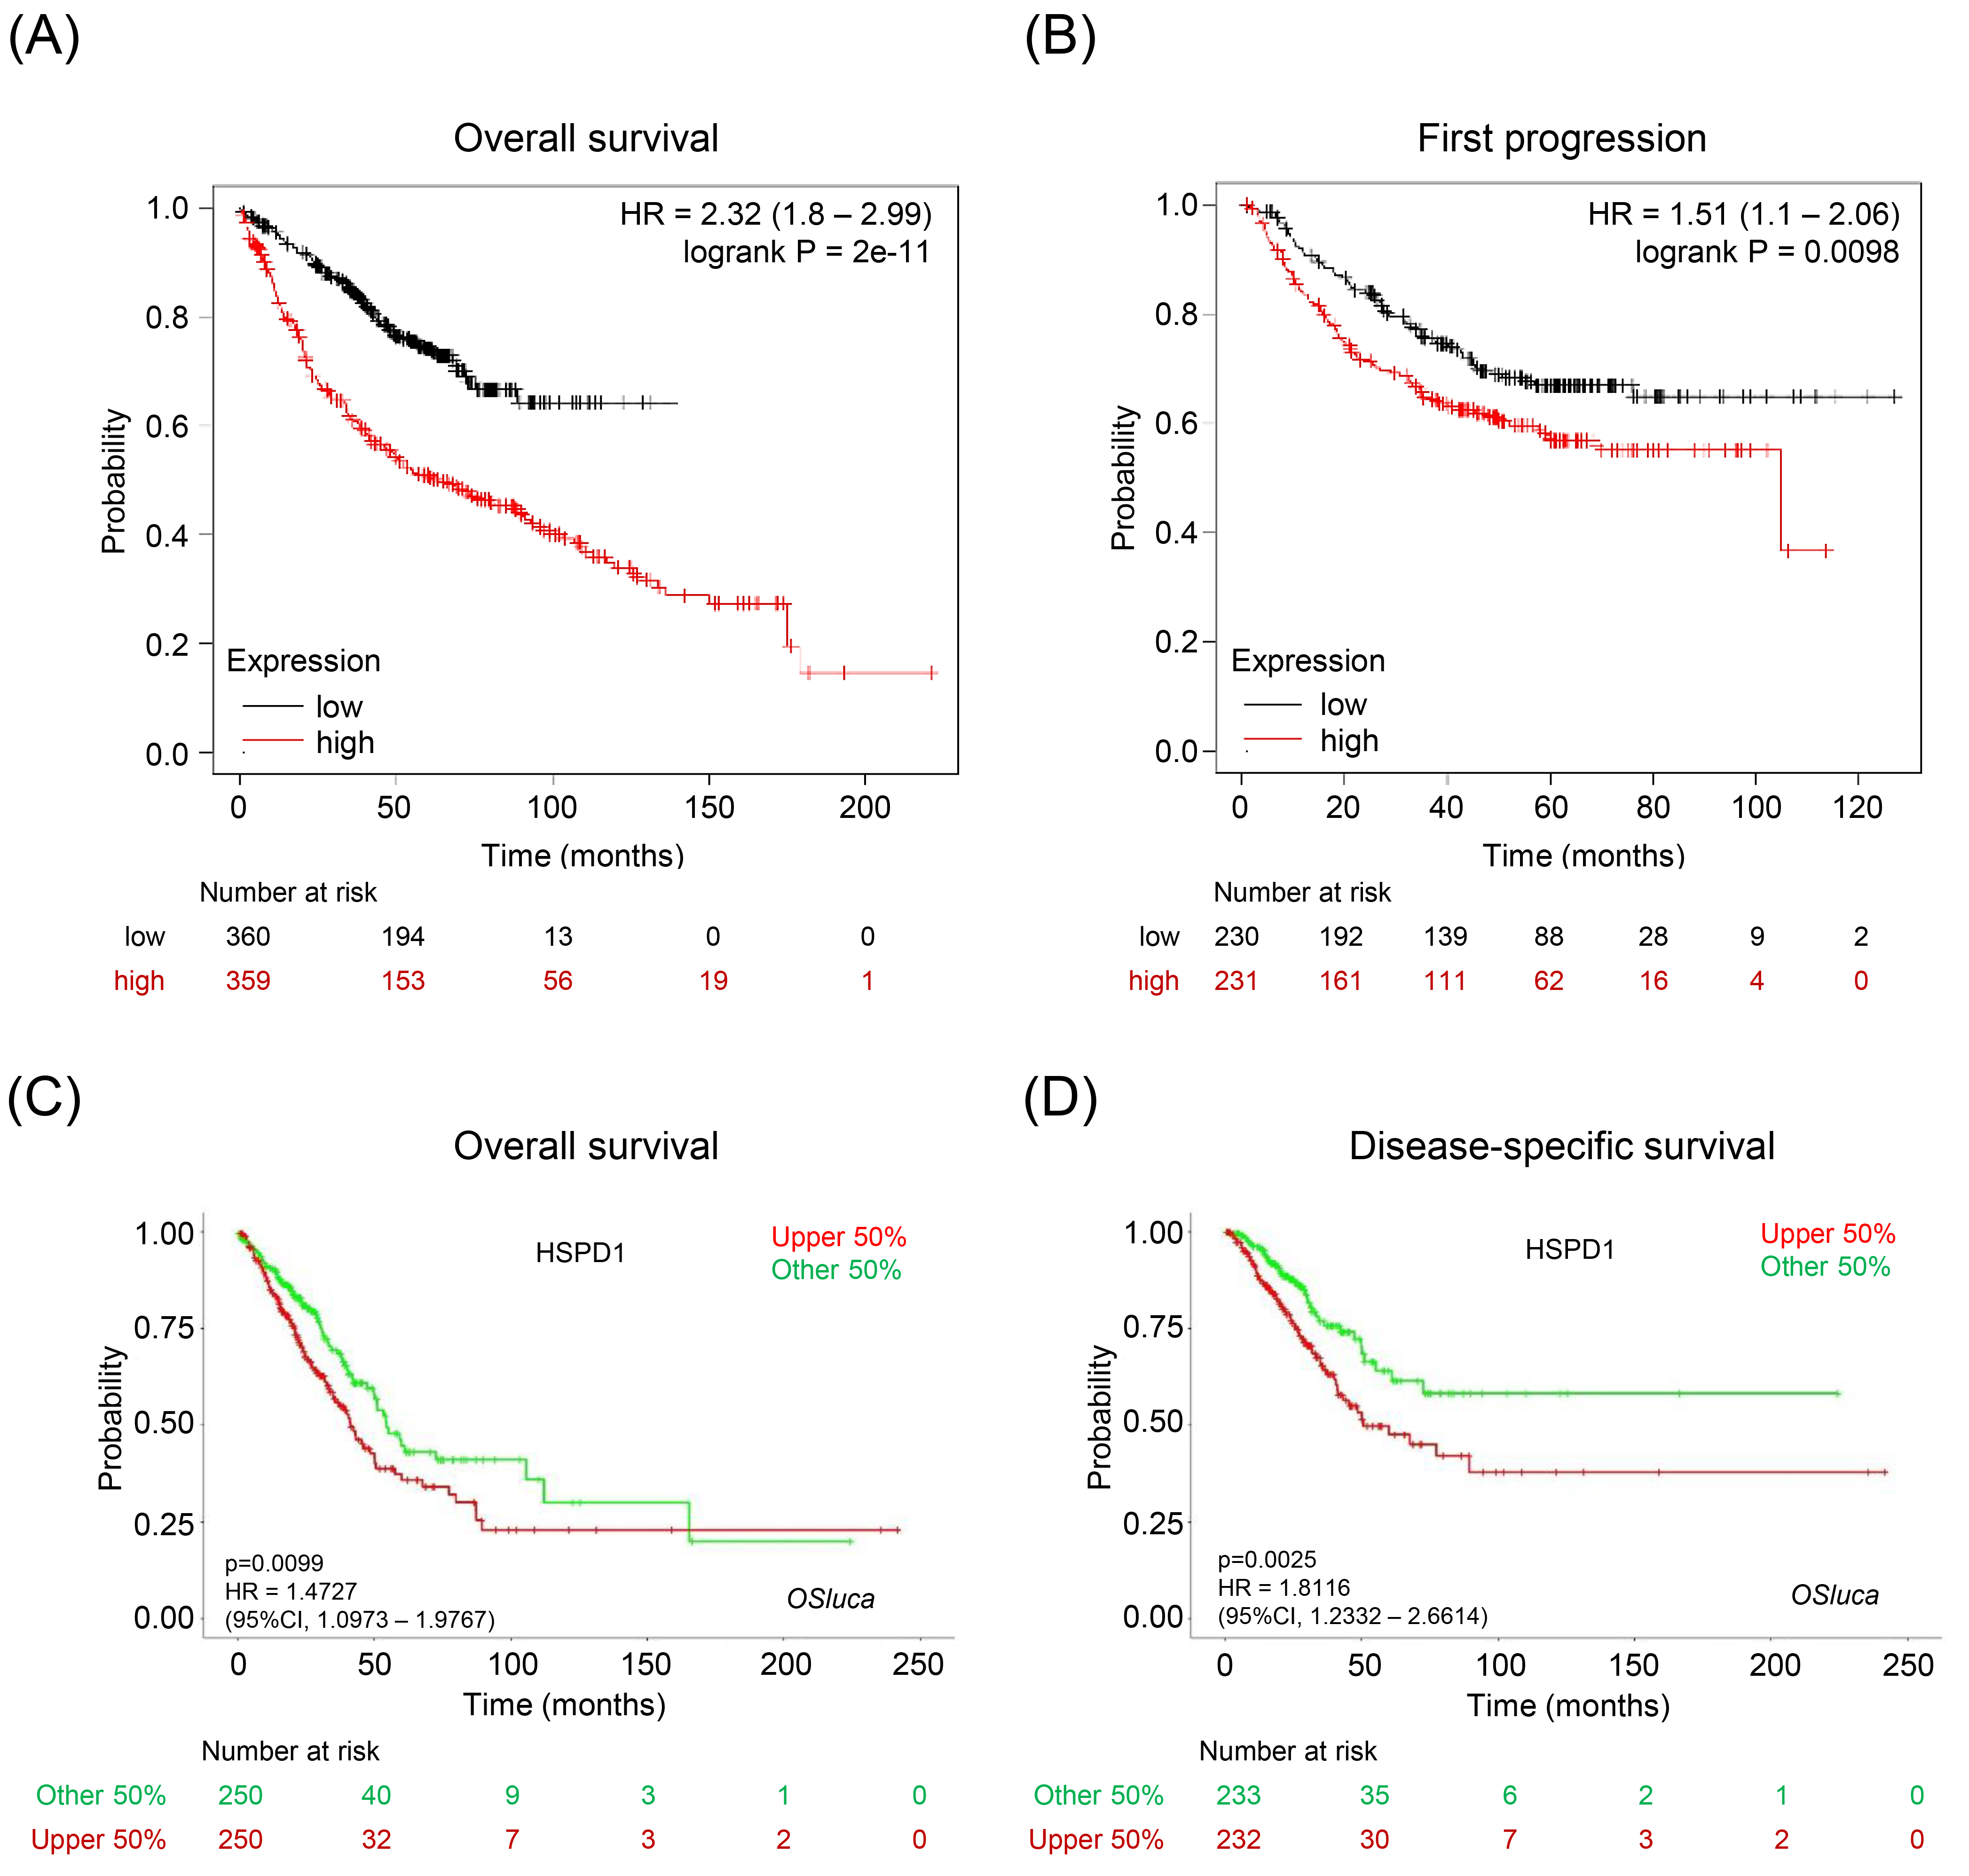 Relationship between HSPD1 expression and survival outcome of LUAD patients. KM survival curves for (A) overall survival and (B) first progression survival of LUAD patients in KM plotter. KM survival curves for (C) overall survival and (D) disease-specific survival of LUAD patients in OSluca.